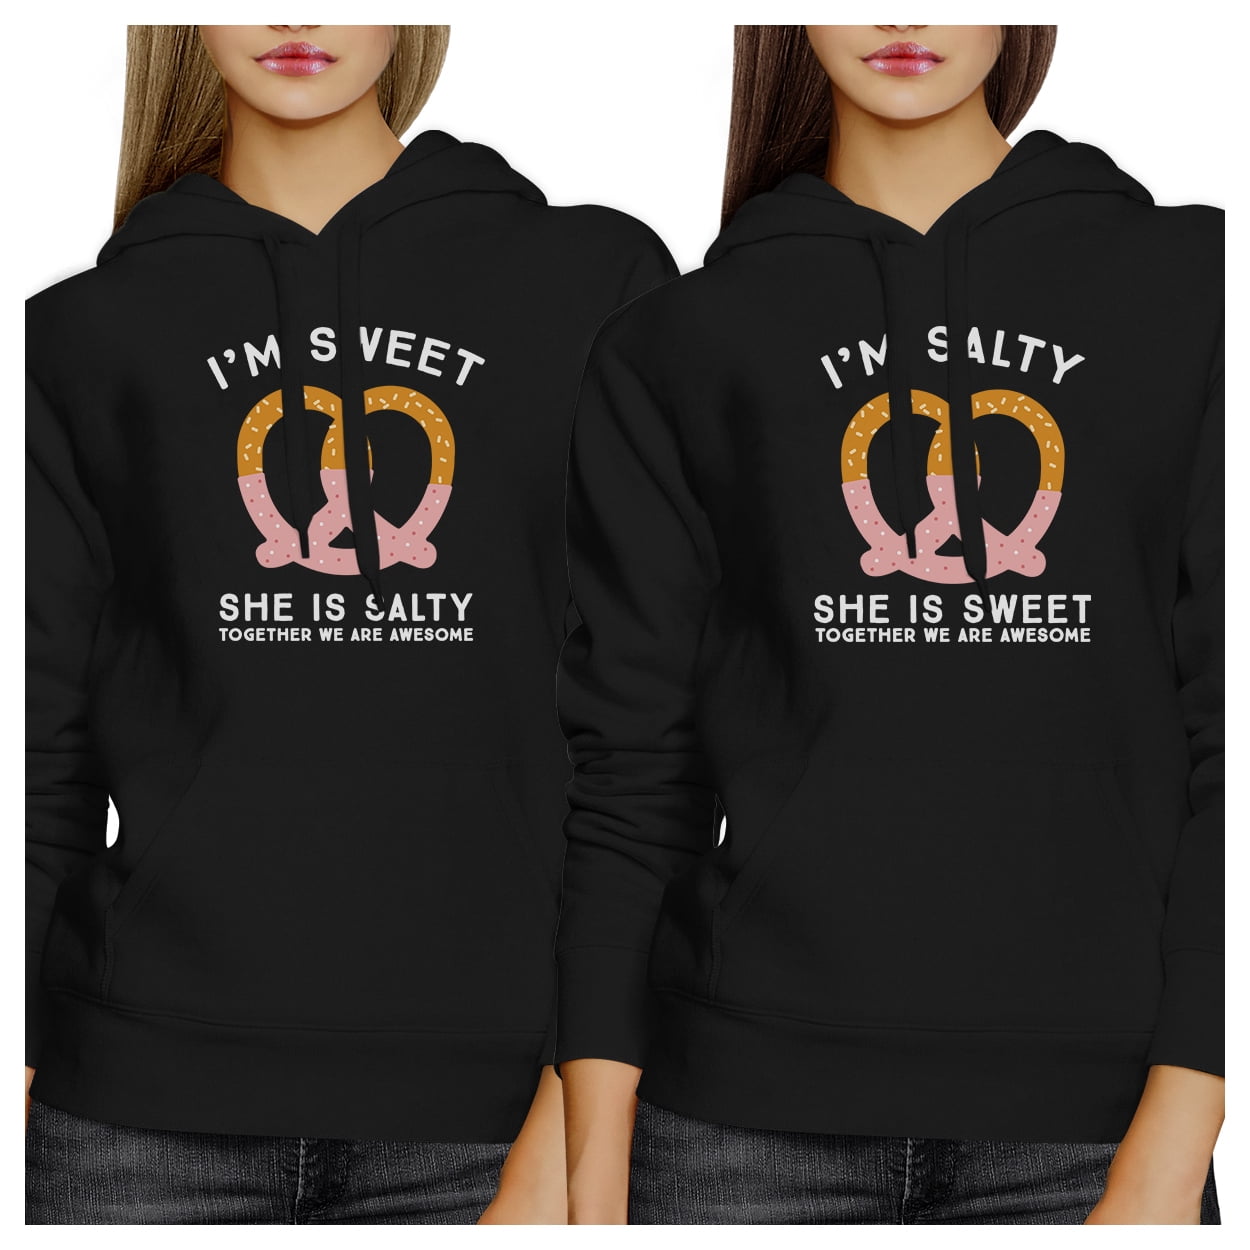 Miss Sweet And Wild Cute Funny Trendy Graphic BFF Couple Black Sweatshirts Great Gift Ideas